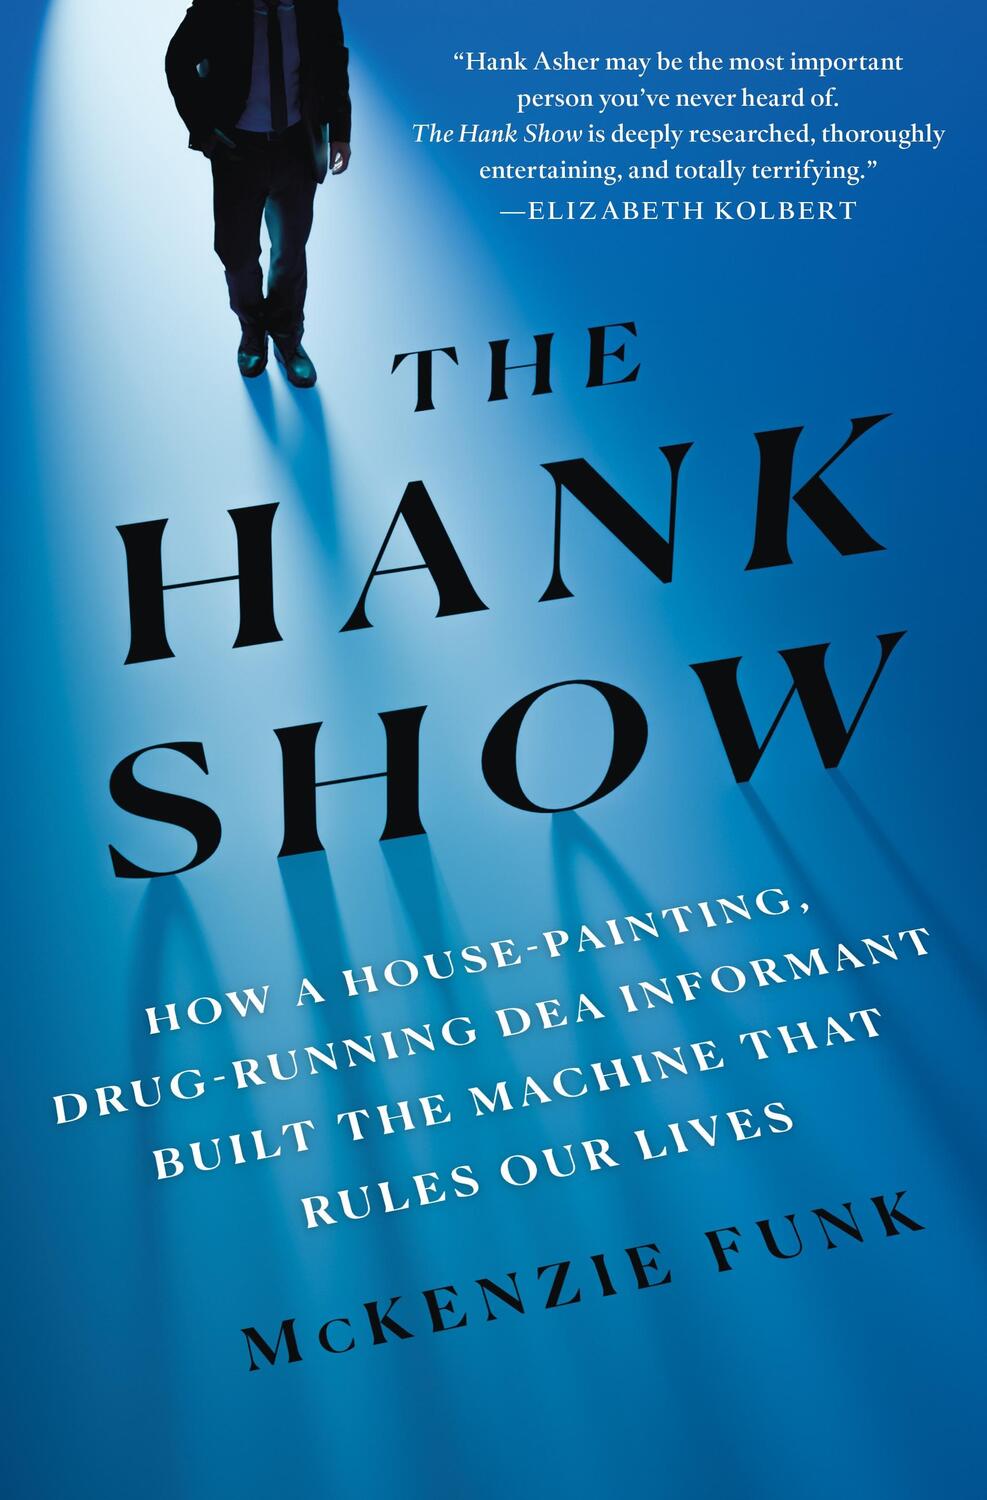 Autor: 9781250209276 | The Hank Show: How a House-Painting, Drug-Running Dea Informant...